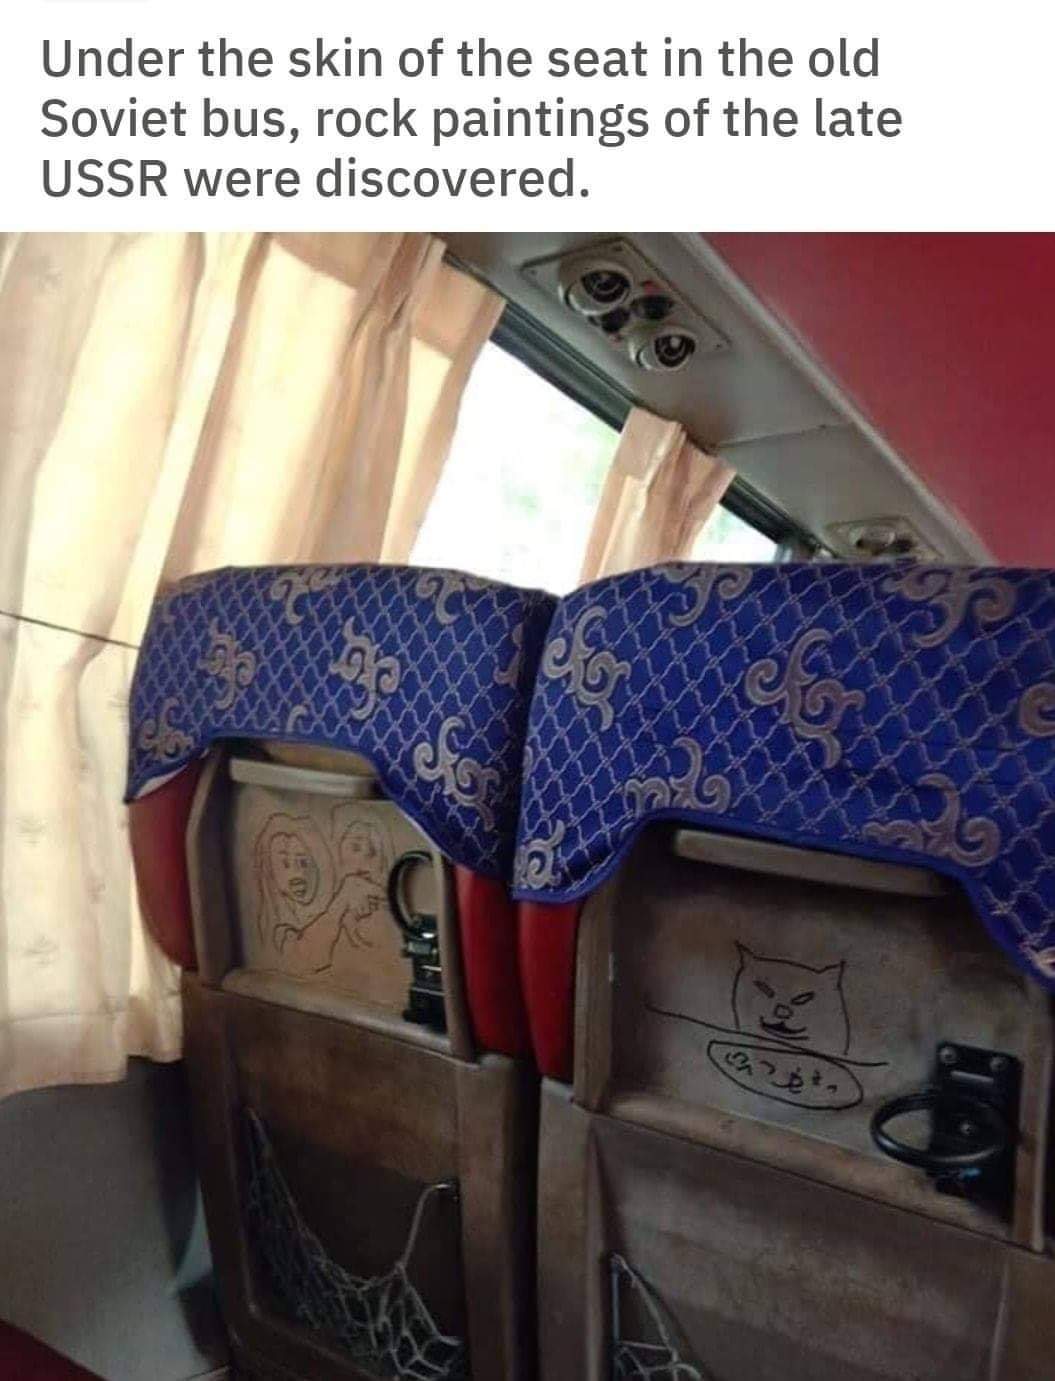 Internet meme - Under the skin of the seat in the old Soviet bus, rock paintings of the late Ussr were discovered.